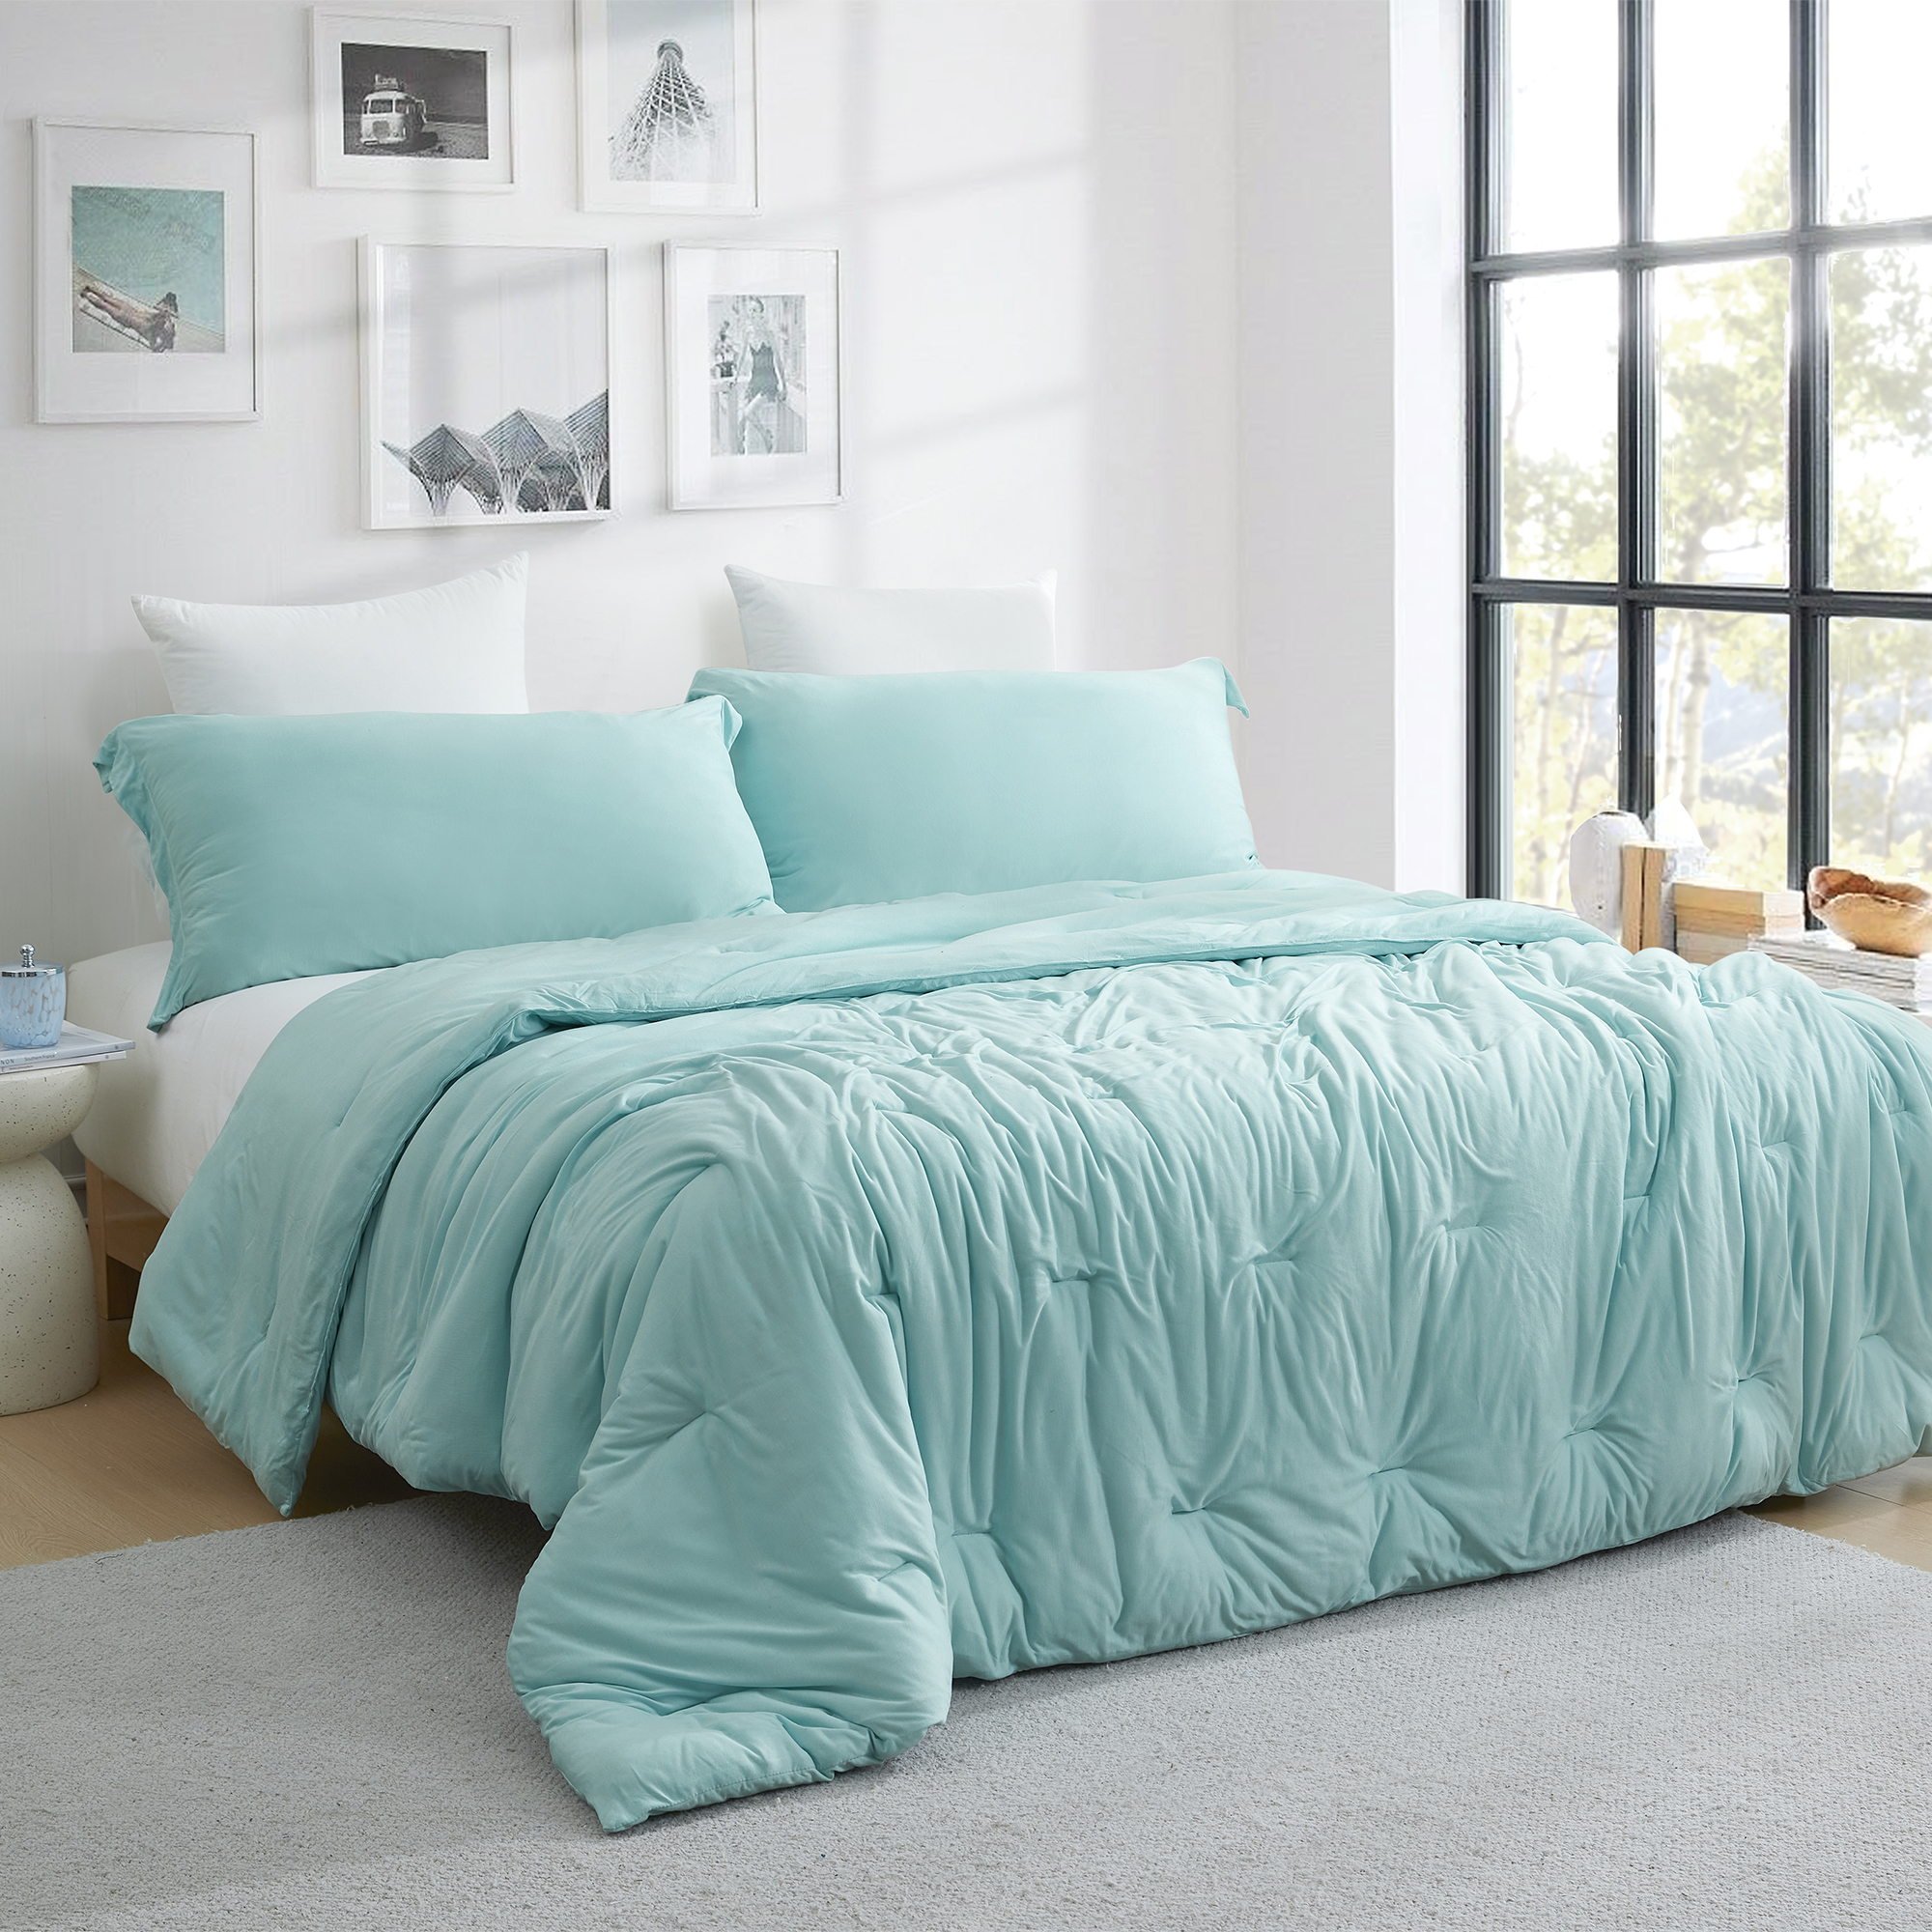 Bamboo Glacier - Coma Inducer® Oversized Queen Comforter - Frosty Eggshell Blue